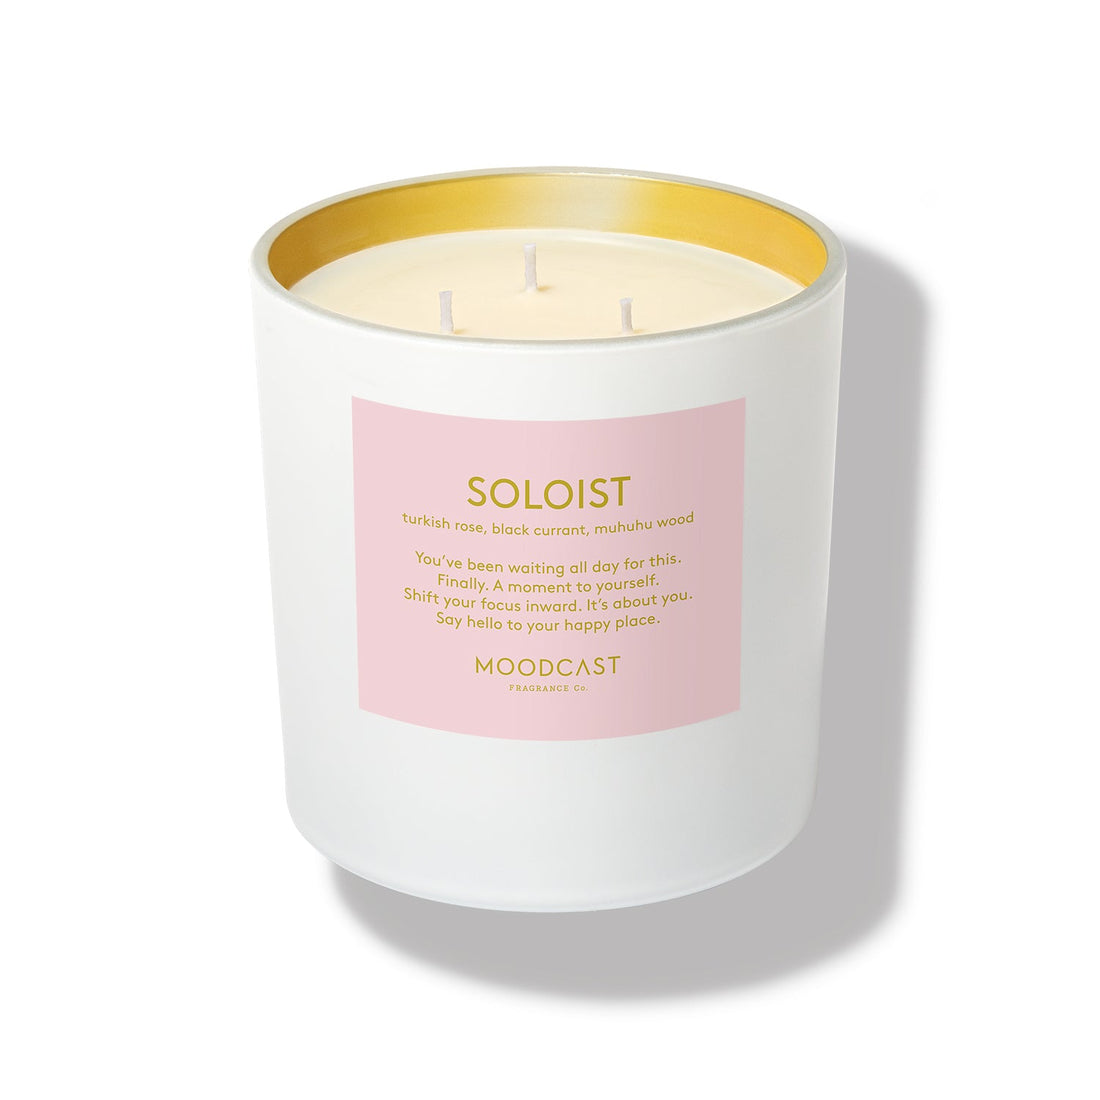 Soloist - Persona Collection (White & Gold) - 24oz/680g Coconut Wax Blend Glass Jar 3-Wick Candle - Key Notes: Turkish Rose, Black Currant, Muhuhu Wood